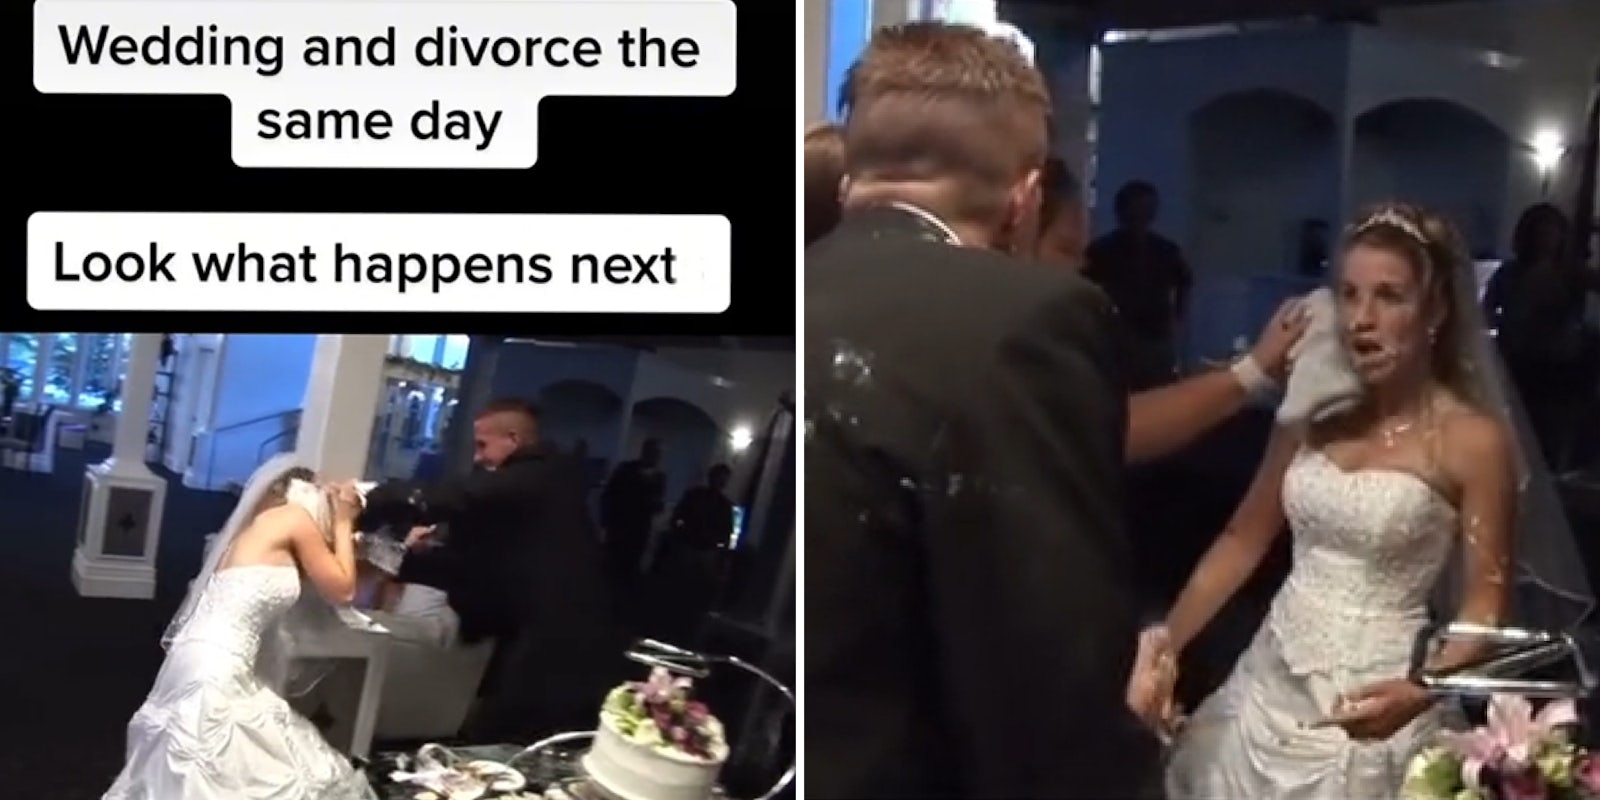 groom slamming cake into brides face at wedding caption 'Wedding and divorce the same day Look what happens next'(l) bride covered in cake hand helping wipe her off upset face hurt groom walking towards her (r)